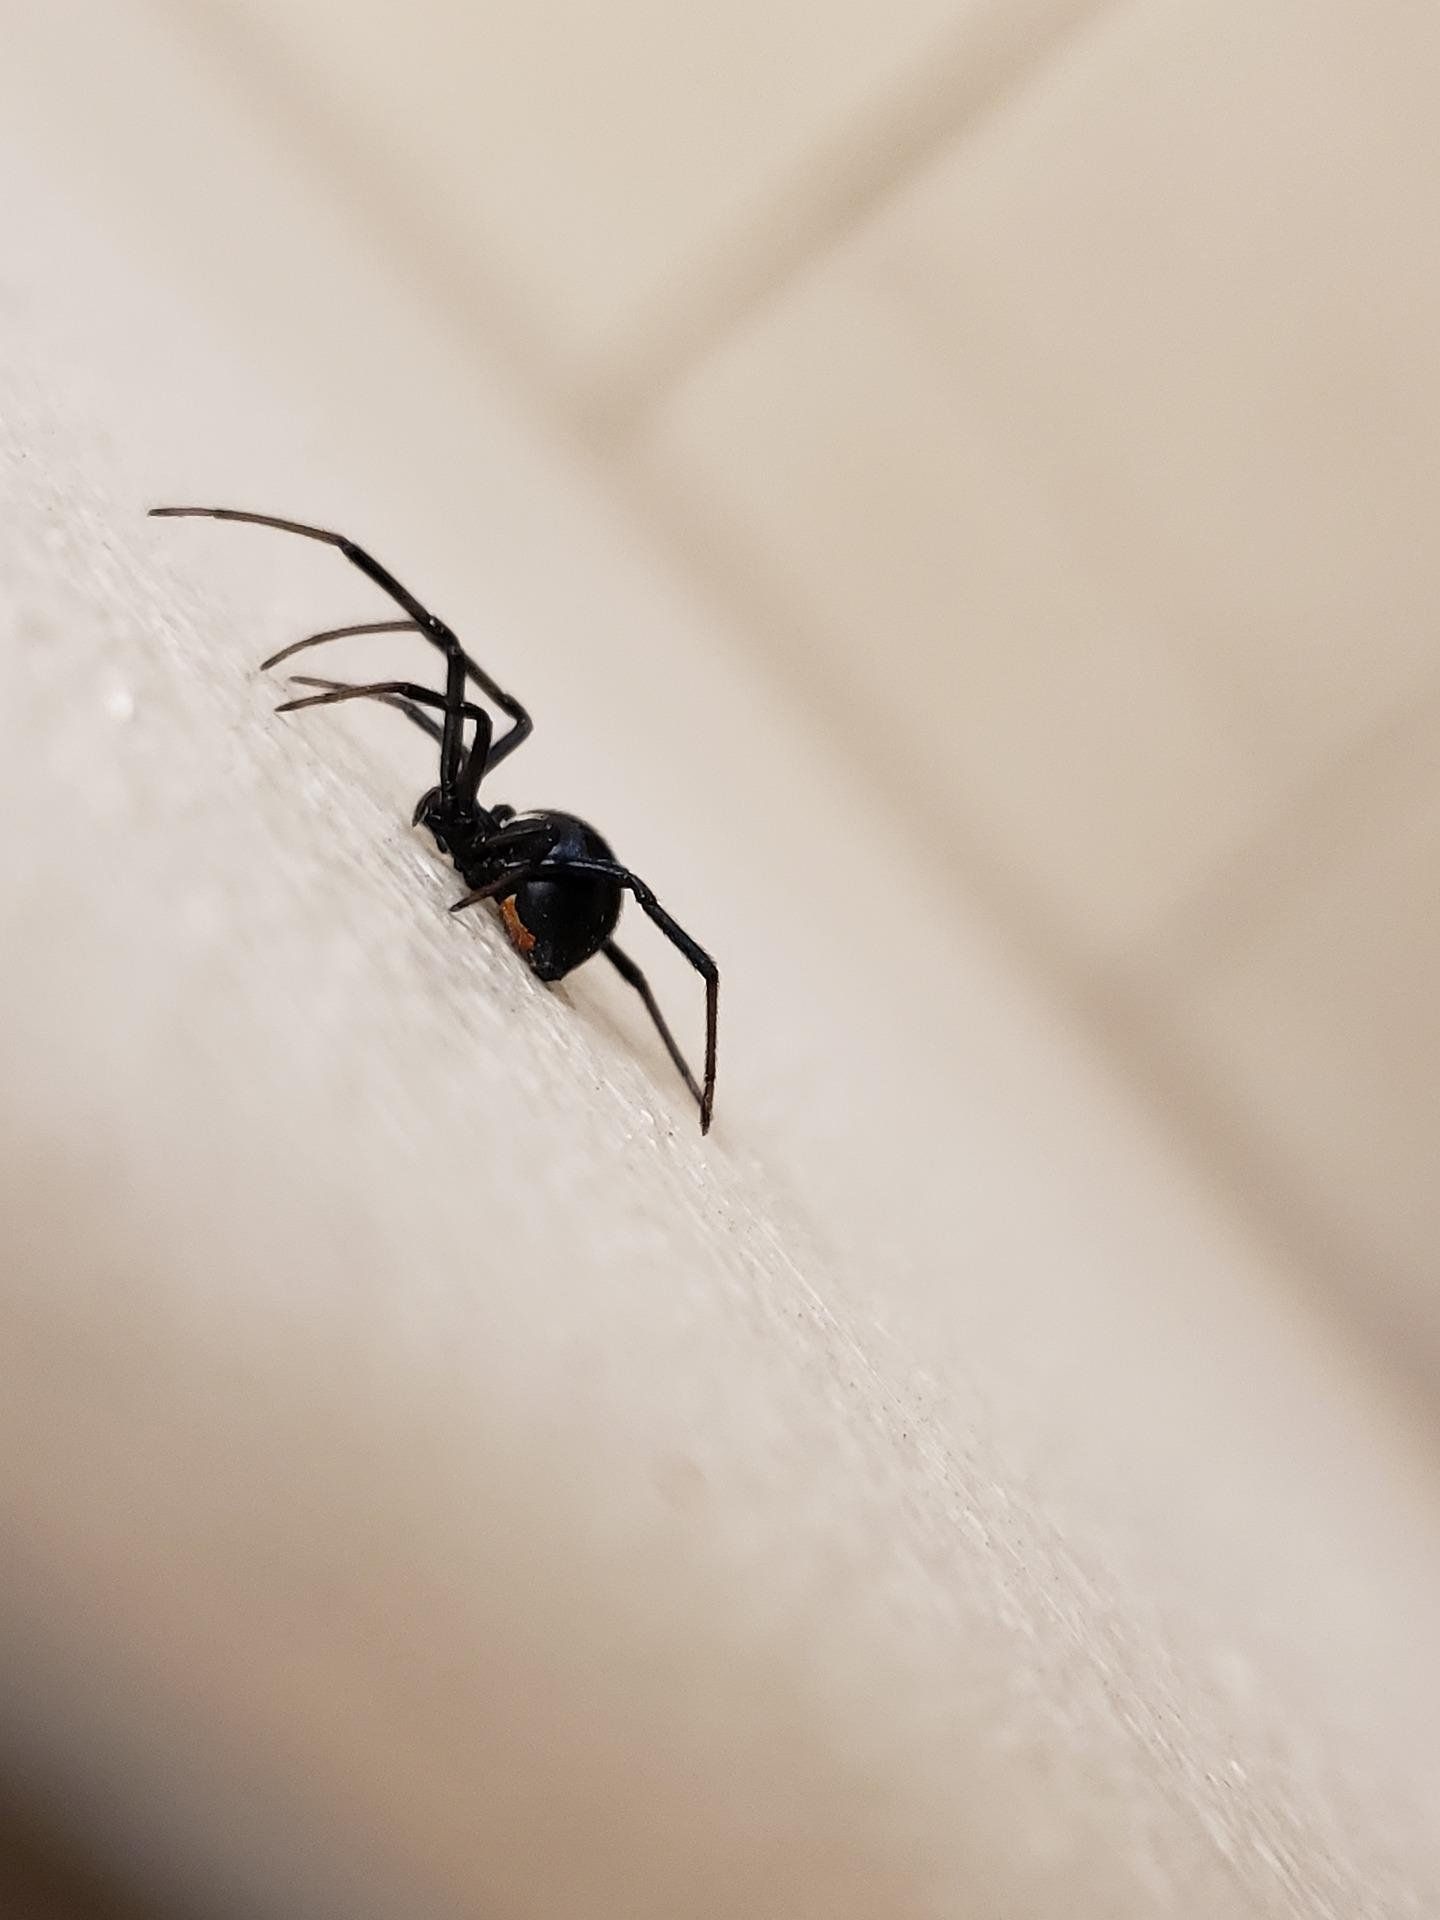 Black widow spider on a white background, one of the venomous spiders in Texas